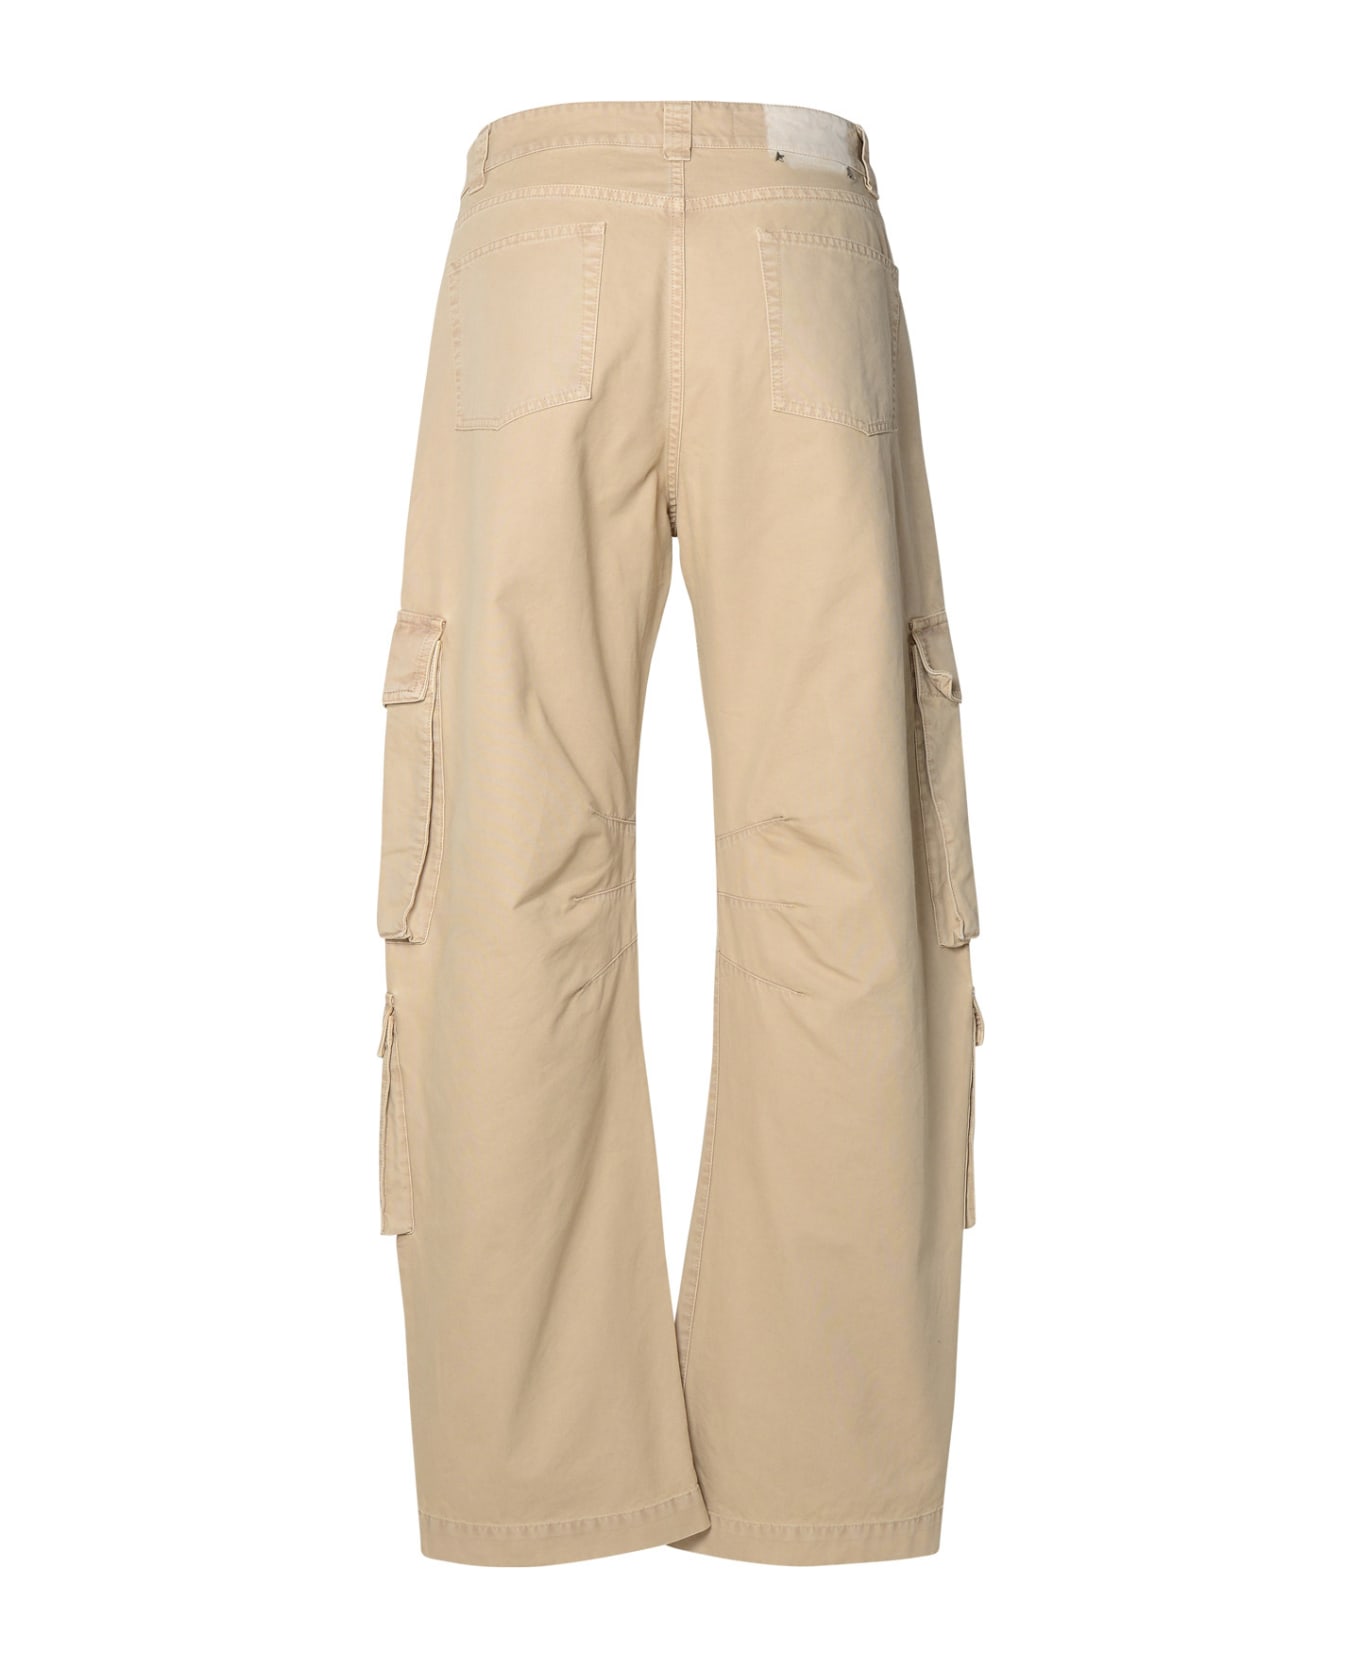 Golden Goose Beige Cotton Cargo Trousers - Trench Coat ボトムス